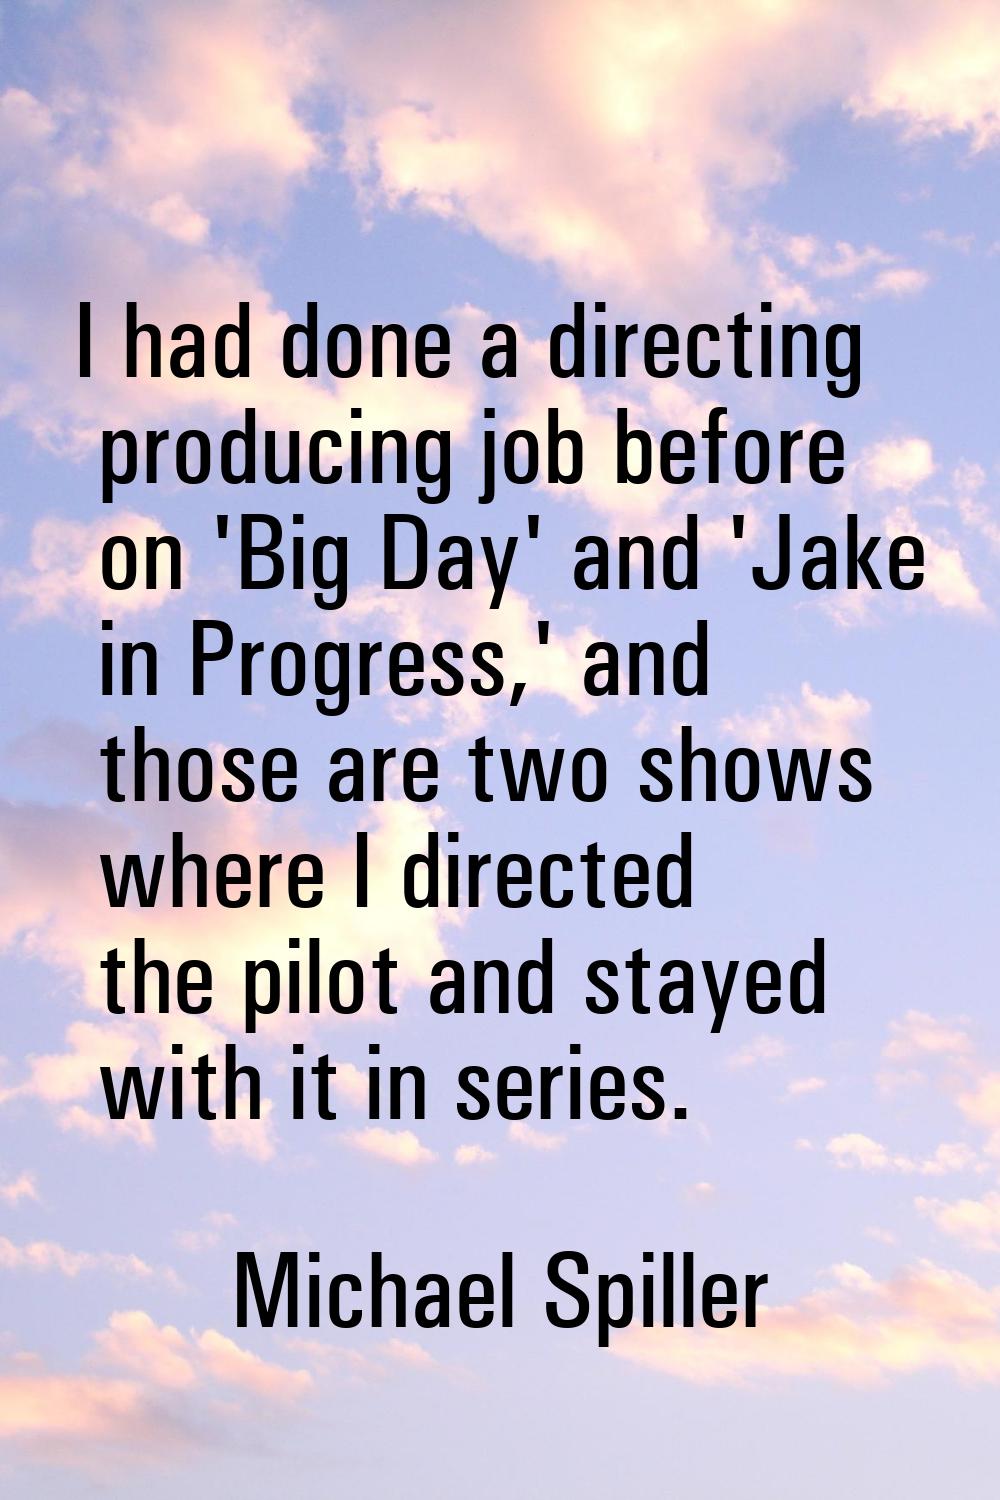 I had done a directing producing job before on 'Big Day' and 'Jake in Progress,' and those are two 